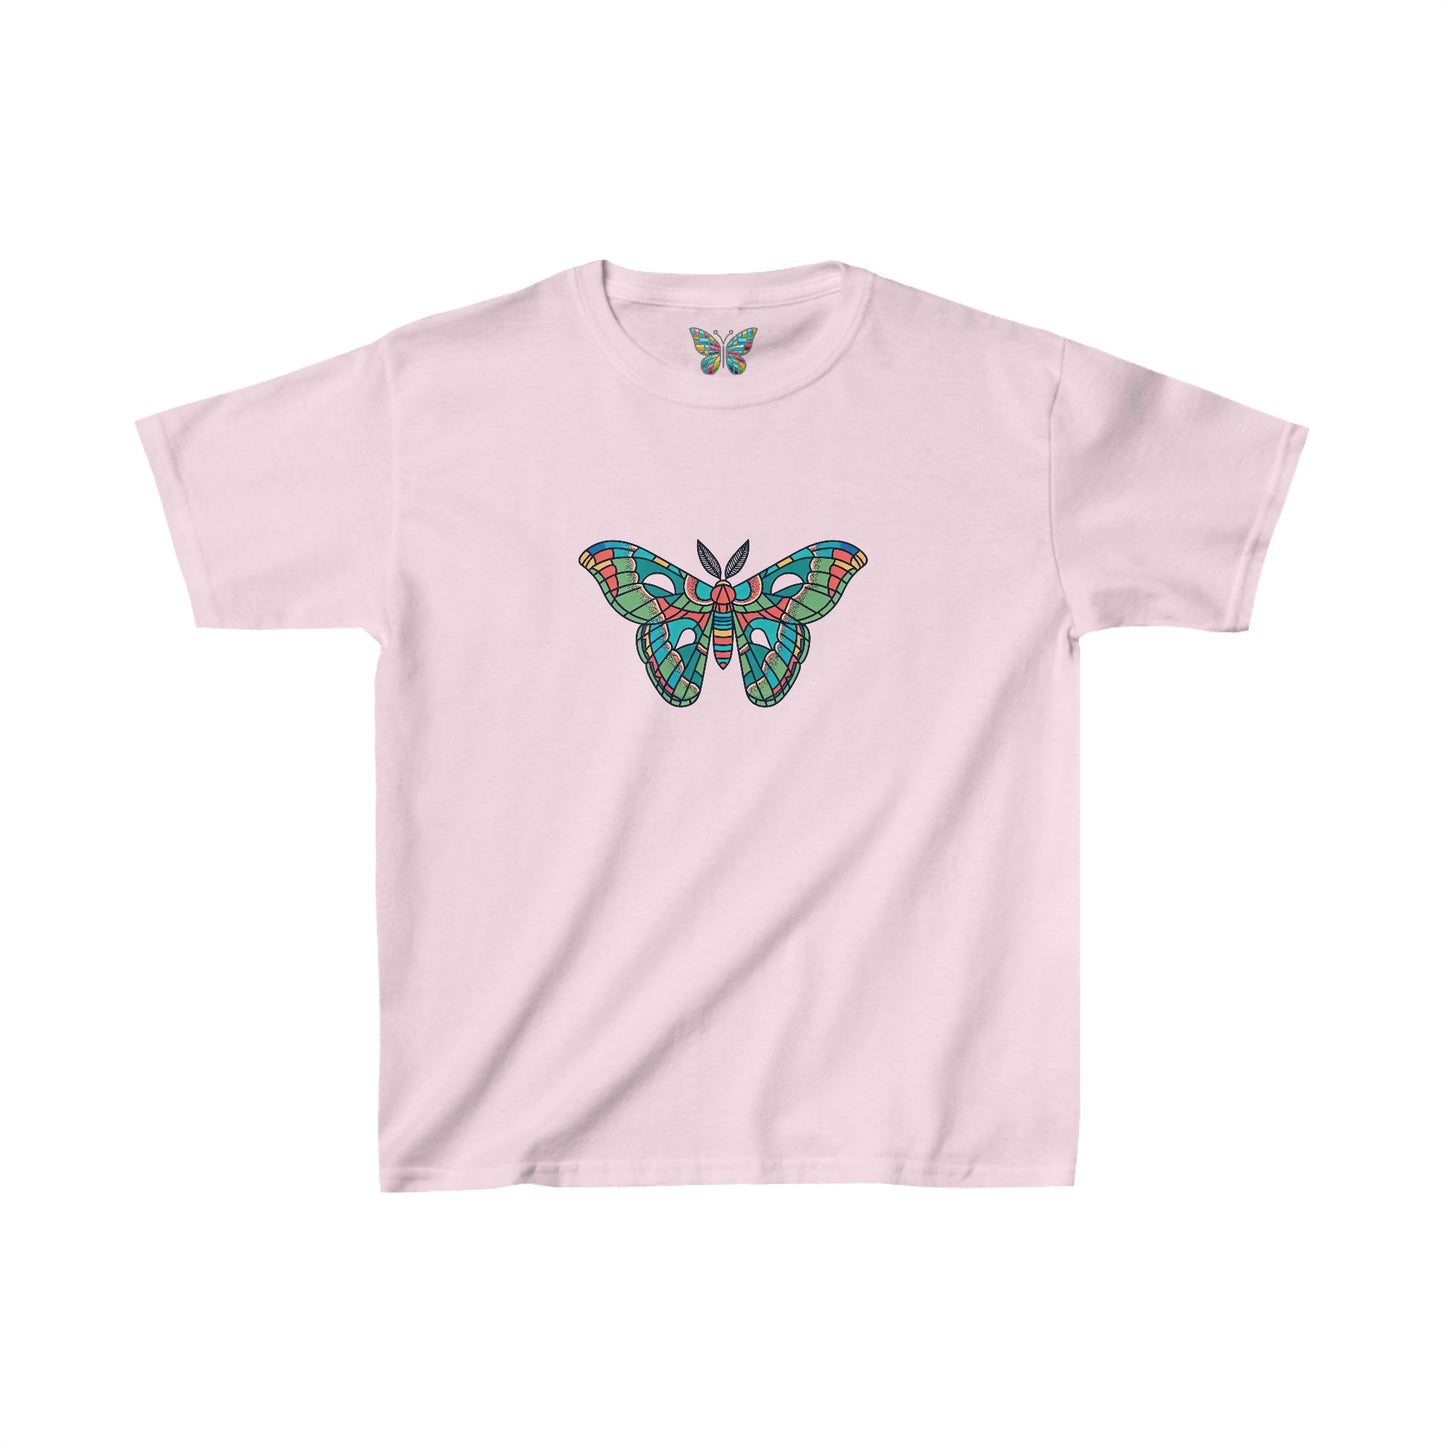 Atlas Moth Serenluce - Youth - Snazzle Tee